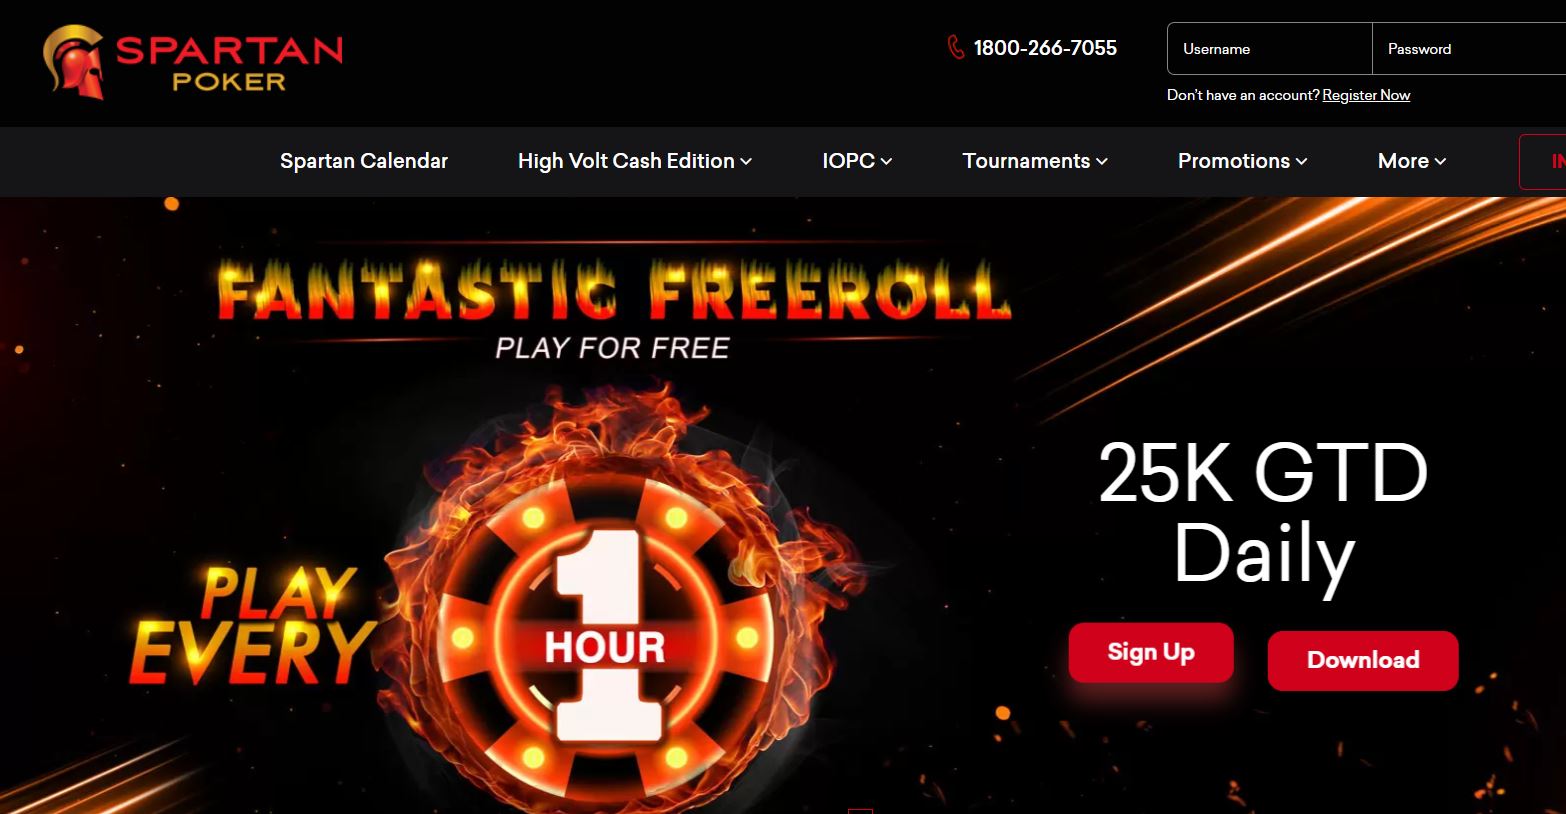 Poker Sites in India